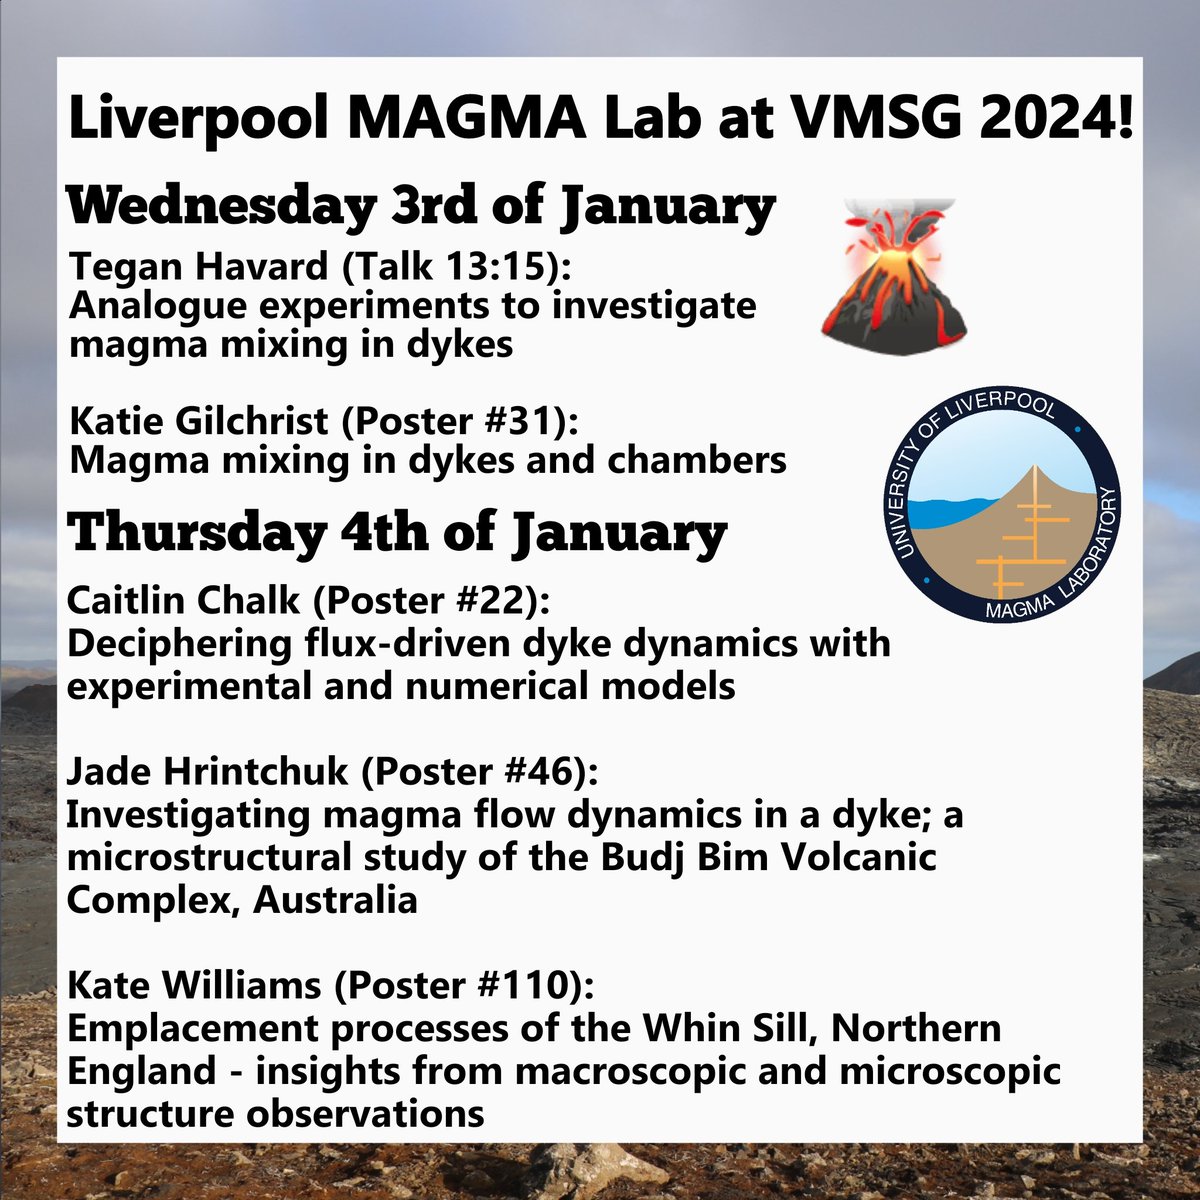 The MAGMA lab are at @vmsg_uk in Bristol this week! We have a selection of talk/posters from Tegan, Katie, Caitlin, Jade (@Basaltically) and Kate (@KWilliams_1996) sharing their work on magma flow/mixing, and crystal alignment in dykes/sills🌋 See below for details! #VMSG2024